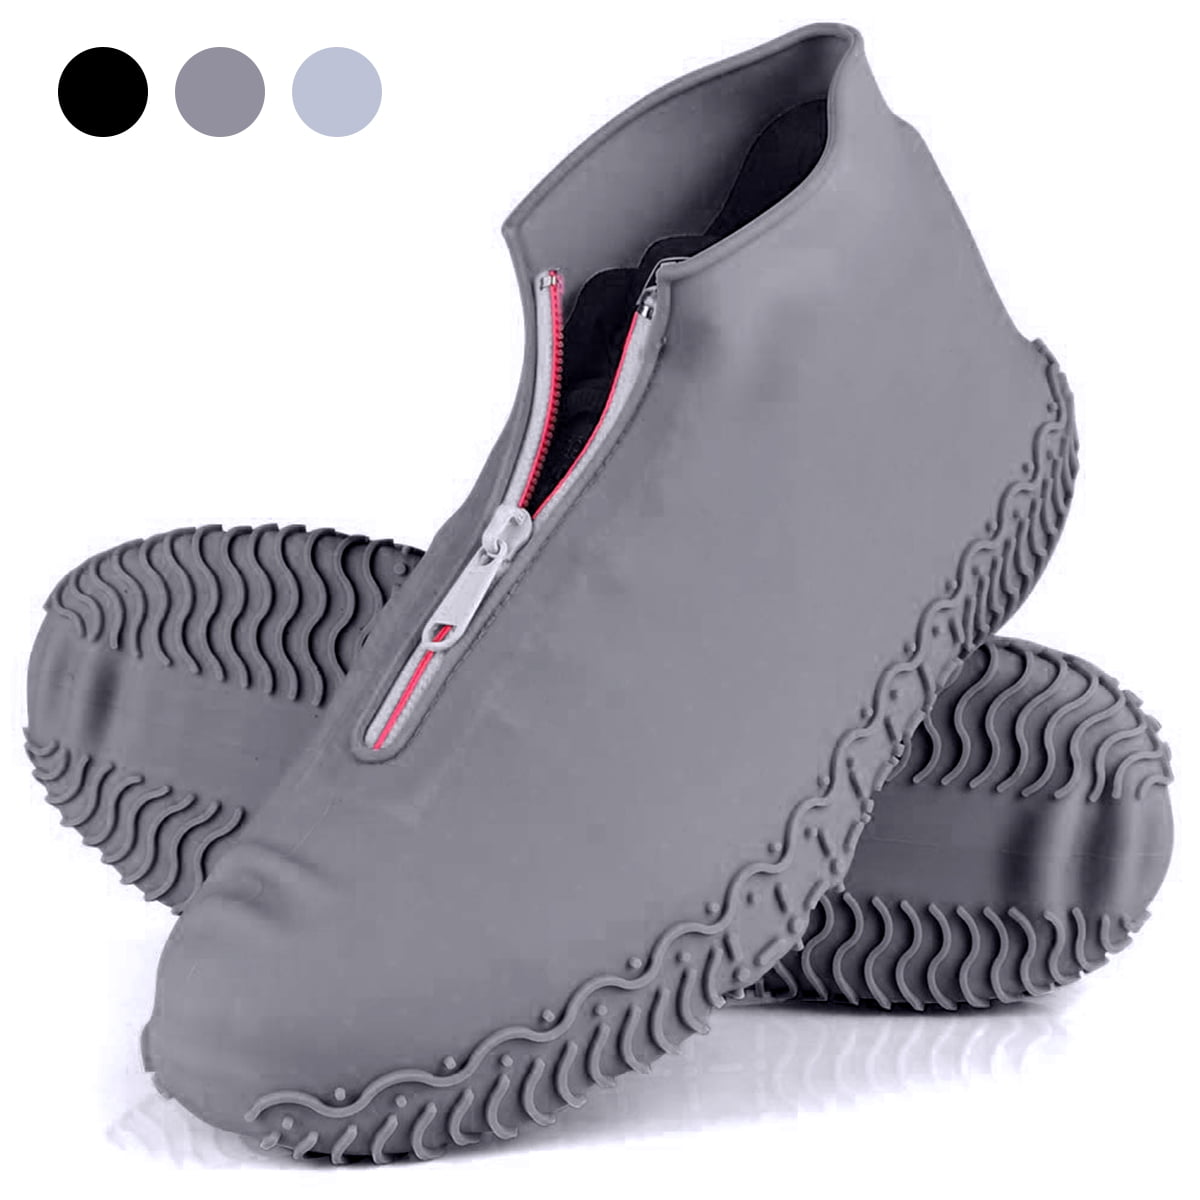 Details about   1 Pair Outdoor Cycling Hiking Silicone Waterproof Aati-slip Shoe Boot Cover soft 